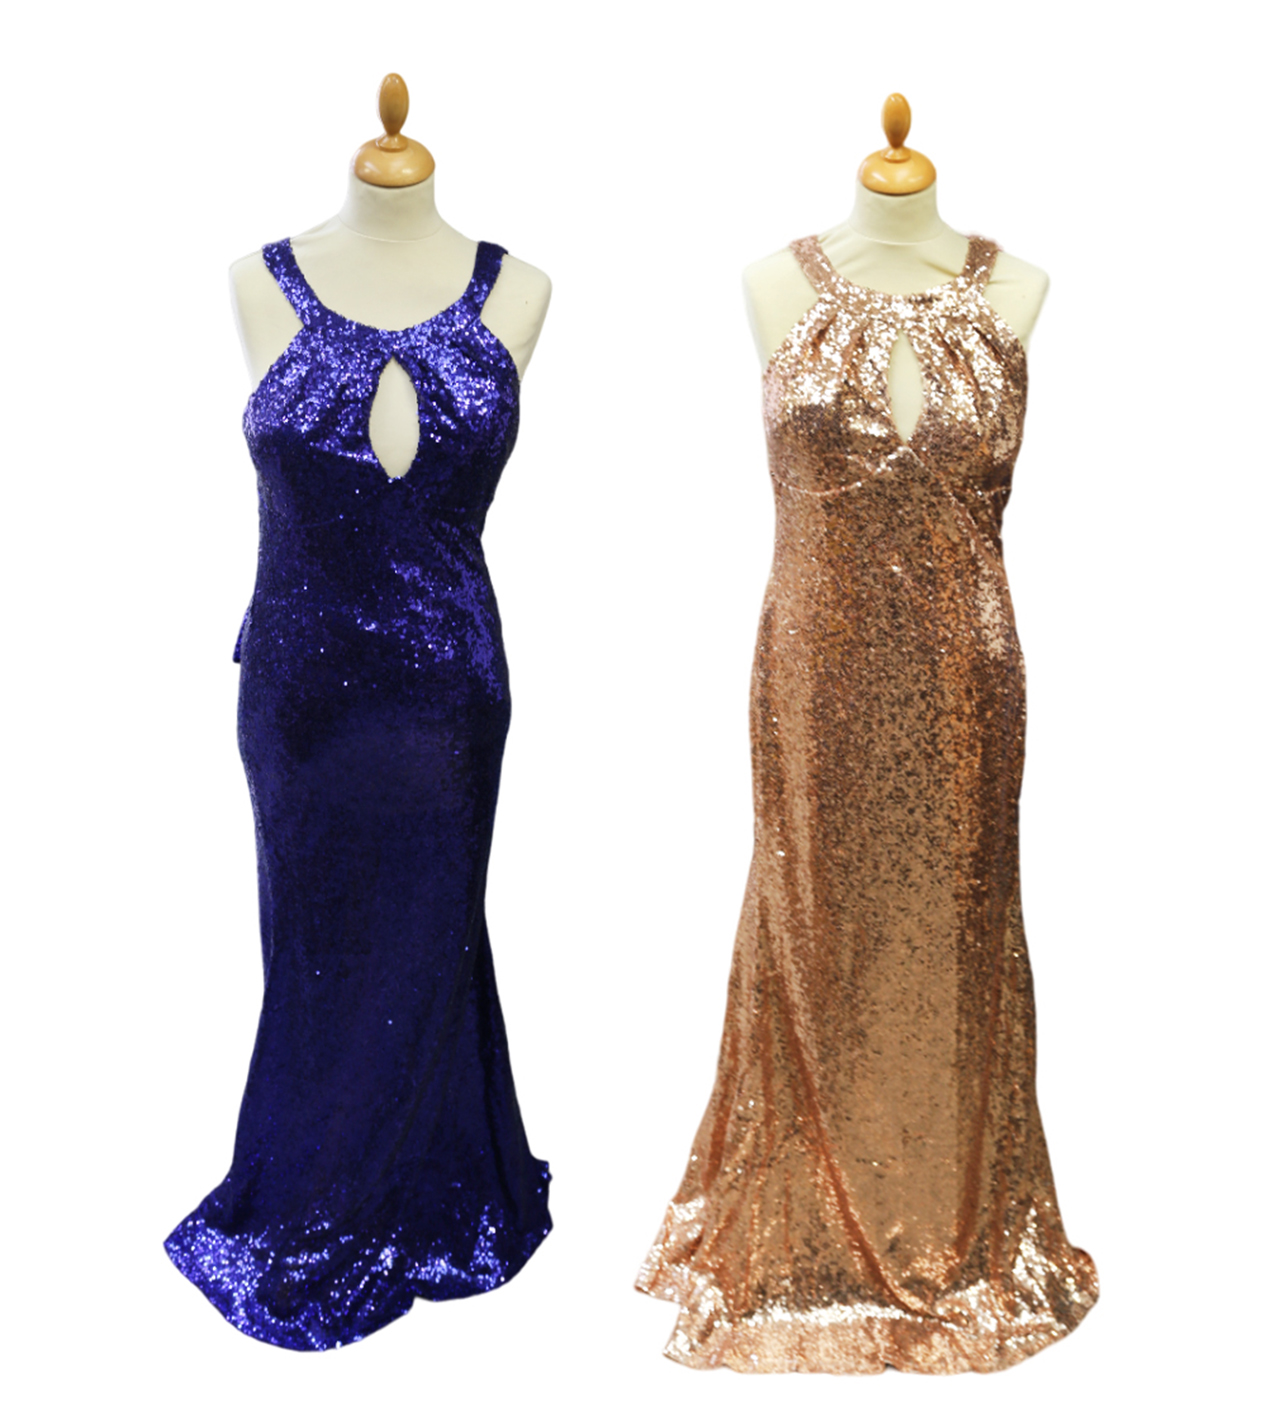 4 royal blue sequined Goddiva evening/prom/bridemaids dresses, long length, 2 x size 10 and 2 x size